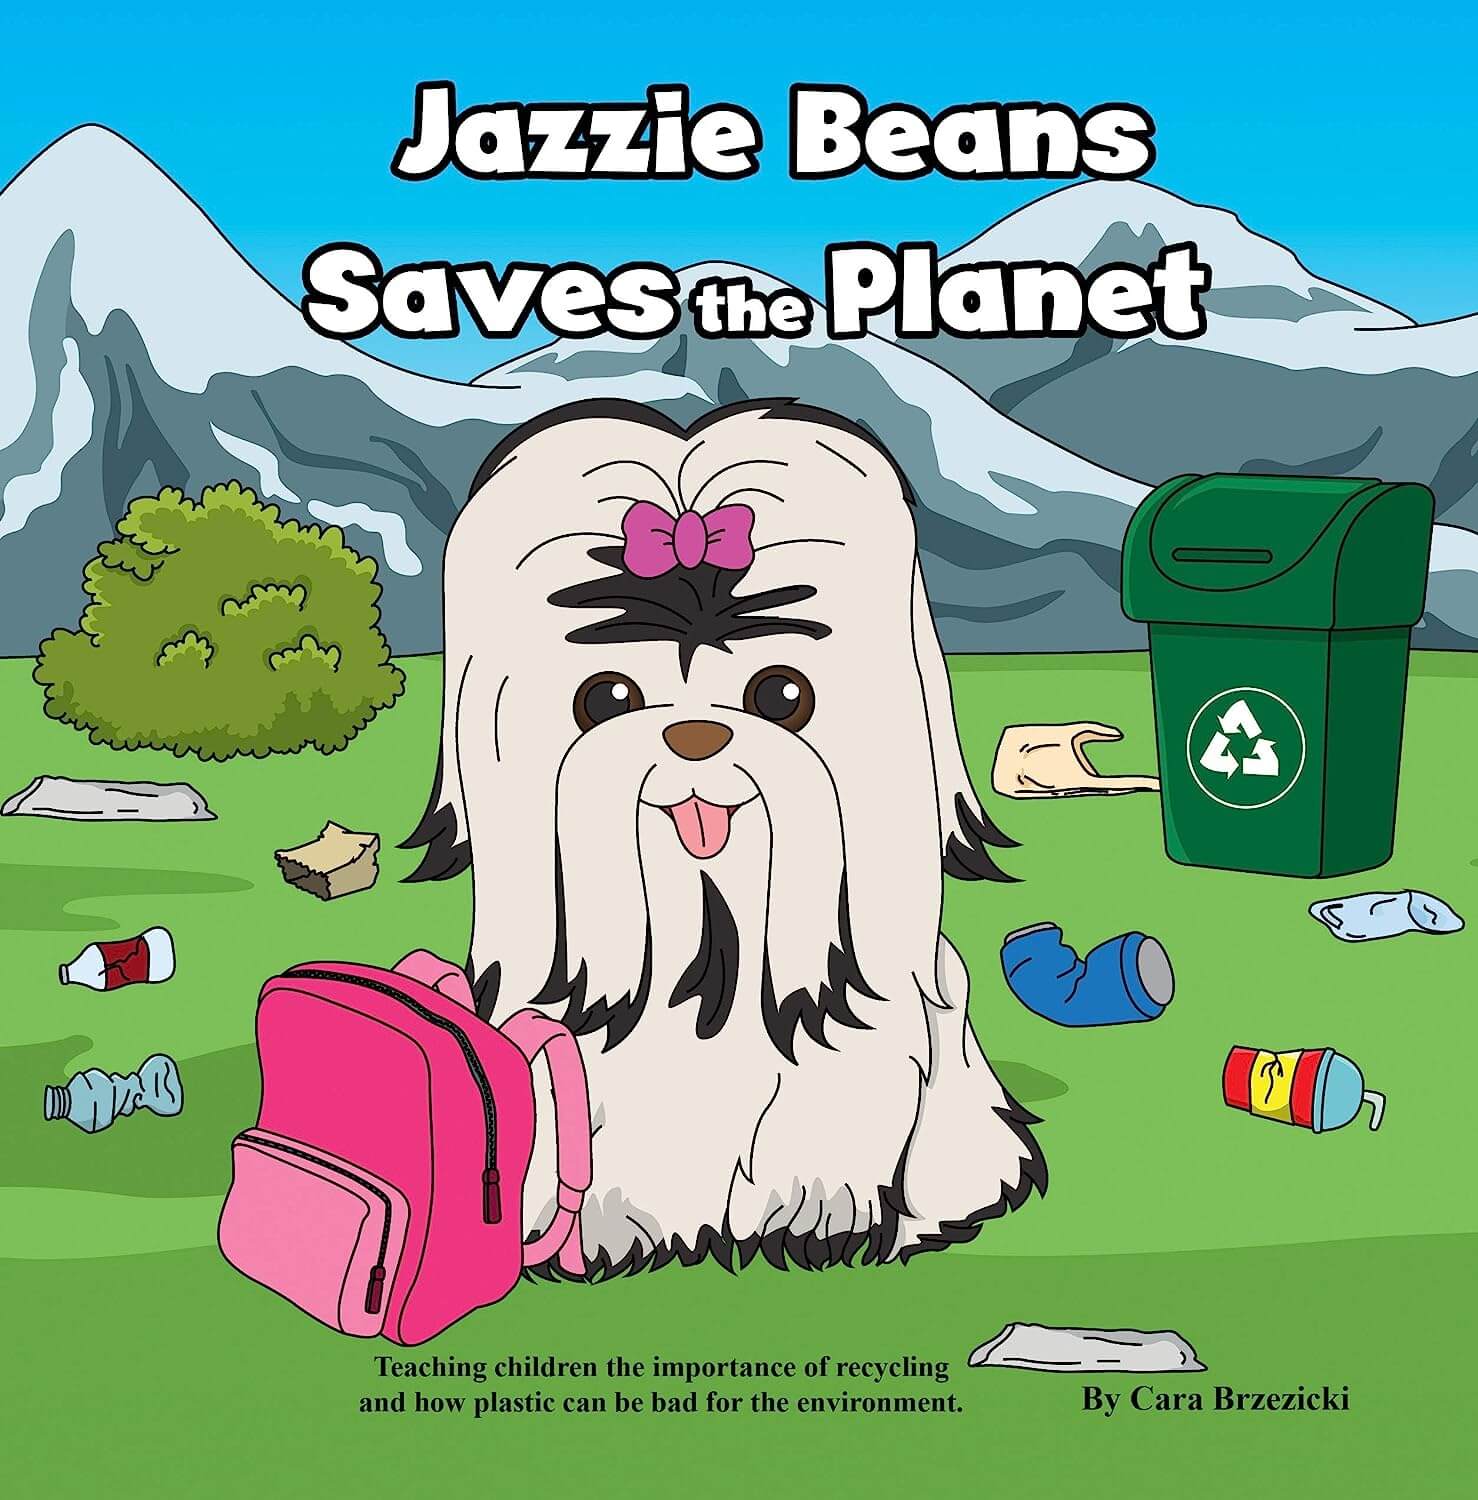 Jazzie Beans saves the planet by Cara Brzezicky